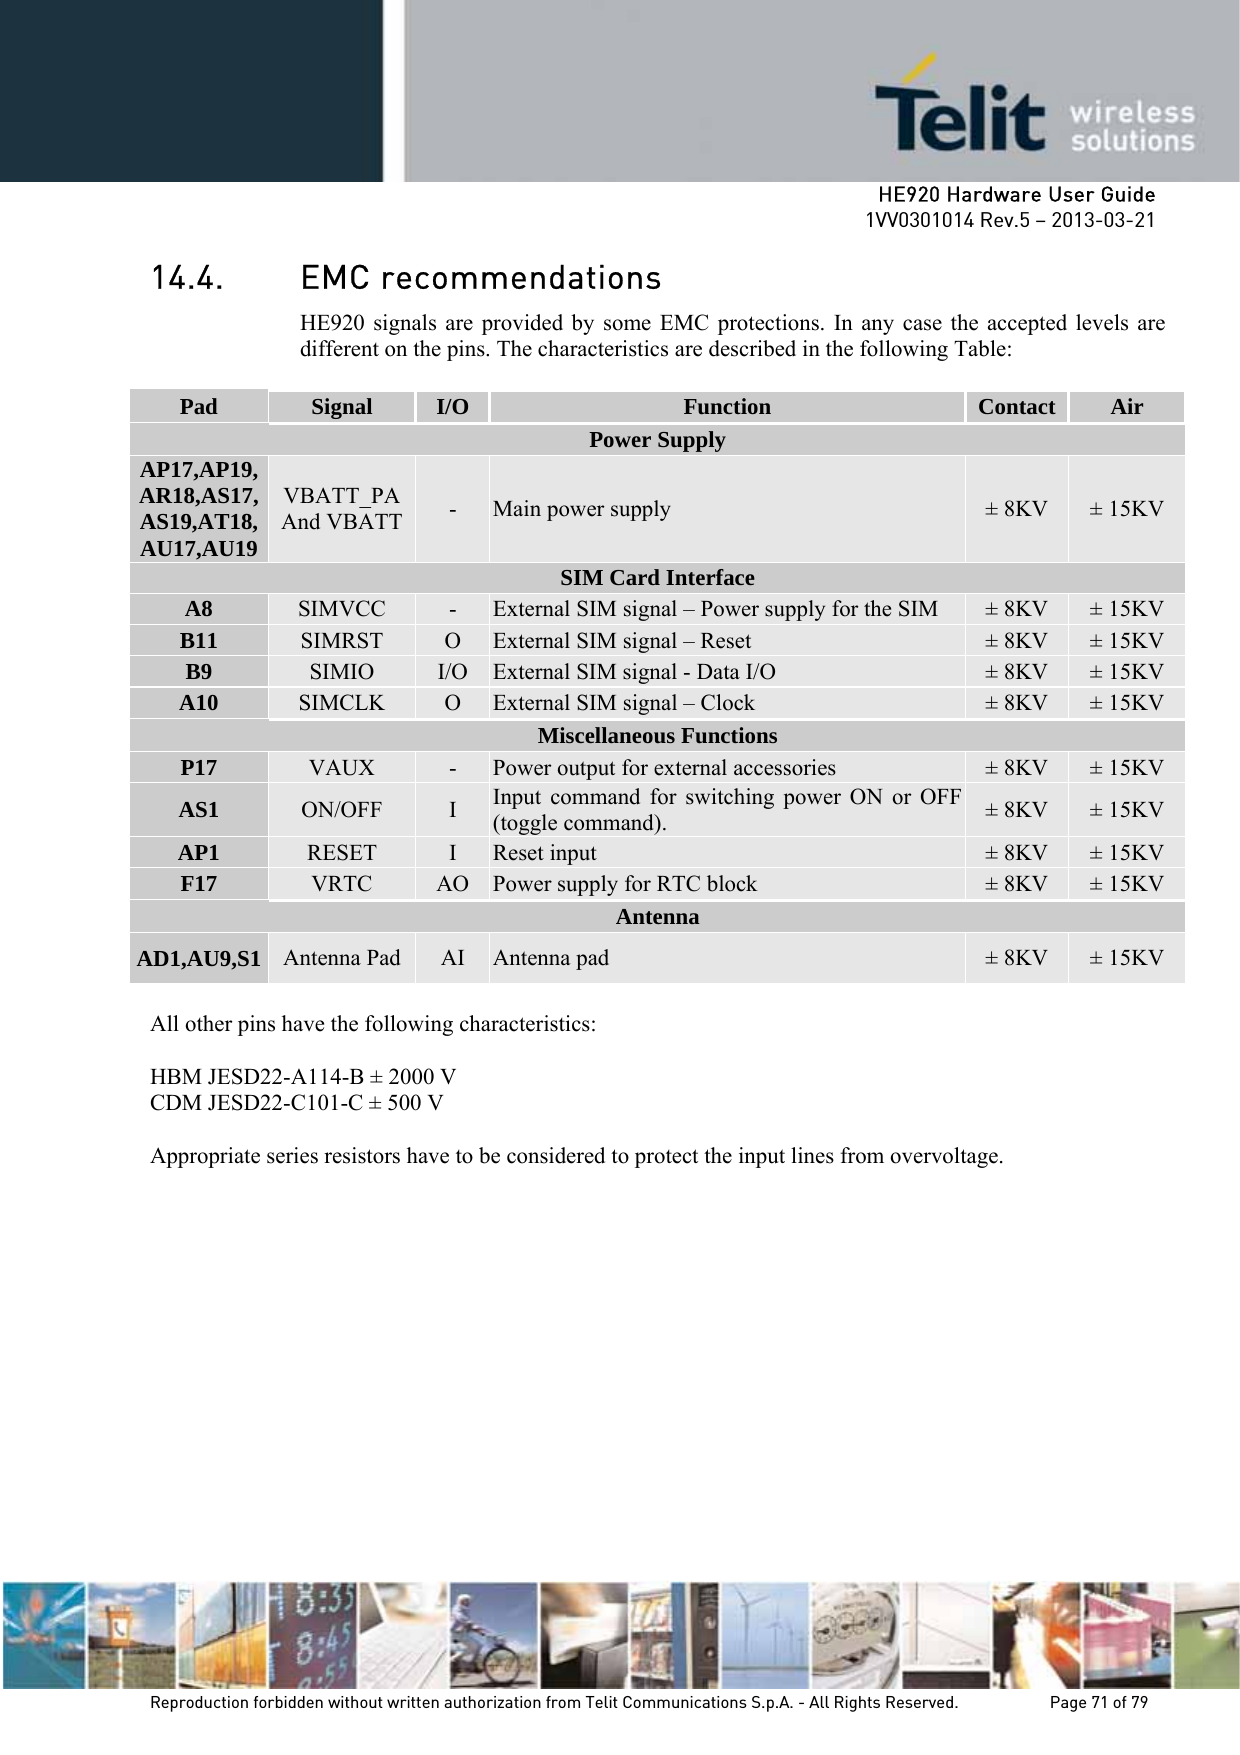     HE920 Hardware User Guide 1VV0301014 Rev.5 – 2013-03-21 Reproduction forbidden without written authorization from Telit Communications S.p.A. - All Rights Reserved.    Page 71 of 79  14.4. EMC recommendations HE920 signals are provided by some EMC protections. In any case the accepted levels are different on the pins. The characteristics are described in the following Table:  Pad  Signal  I/O  Function  Contact Air Power Supply AP17,AP19,AR18,AS17,AS19,AT18,AU17,AU19 VBATT_PA And VBATT  -  Main power supply  ± 8KV  ± 15KV SIM Card Interface A8  SIMVCC  -  External SIM signal – Power supply for the SIM  ± 8KV  ± 15KV B11  SIMRST  O  External SIM signal – Reset  ± 8KV  ± 15KV B9  SIMIO  I/O  External SIM signal - Data I/O  ± 8KV  ± 15KV A10  SIMCLK  O  External SIM signal – Clock  ± 8KV  ± 15KV Miscellaneous Functions P17  VAUX  -  Power output for external accessories  ± 8KV  ± 15KV AS1  ON/OFF  I  Input command for switching power ON or OFF (toggle command).   ± 8KV  ± 15KV AP1  RESET  I  Reset input  ± 8KV  ± 15KV F17  VRTC  AO  Power supply for RTC block  ± 8KV  ± 15KV Antenna AD1,AU9,S1  Antenna Pad  AI  Antenna pad  ± 8KV  ± 15KV  All other pins have the following characteristics:  HBM JESD22-A114-B ± 2000 V CDM JESD22-C101-C ± 500 V  Appropriate series resistors have to be considered to protect the input lines from overvoltage. 